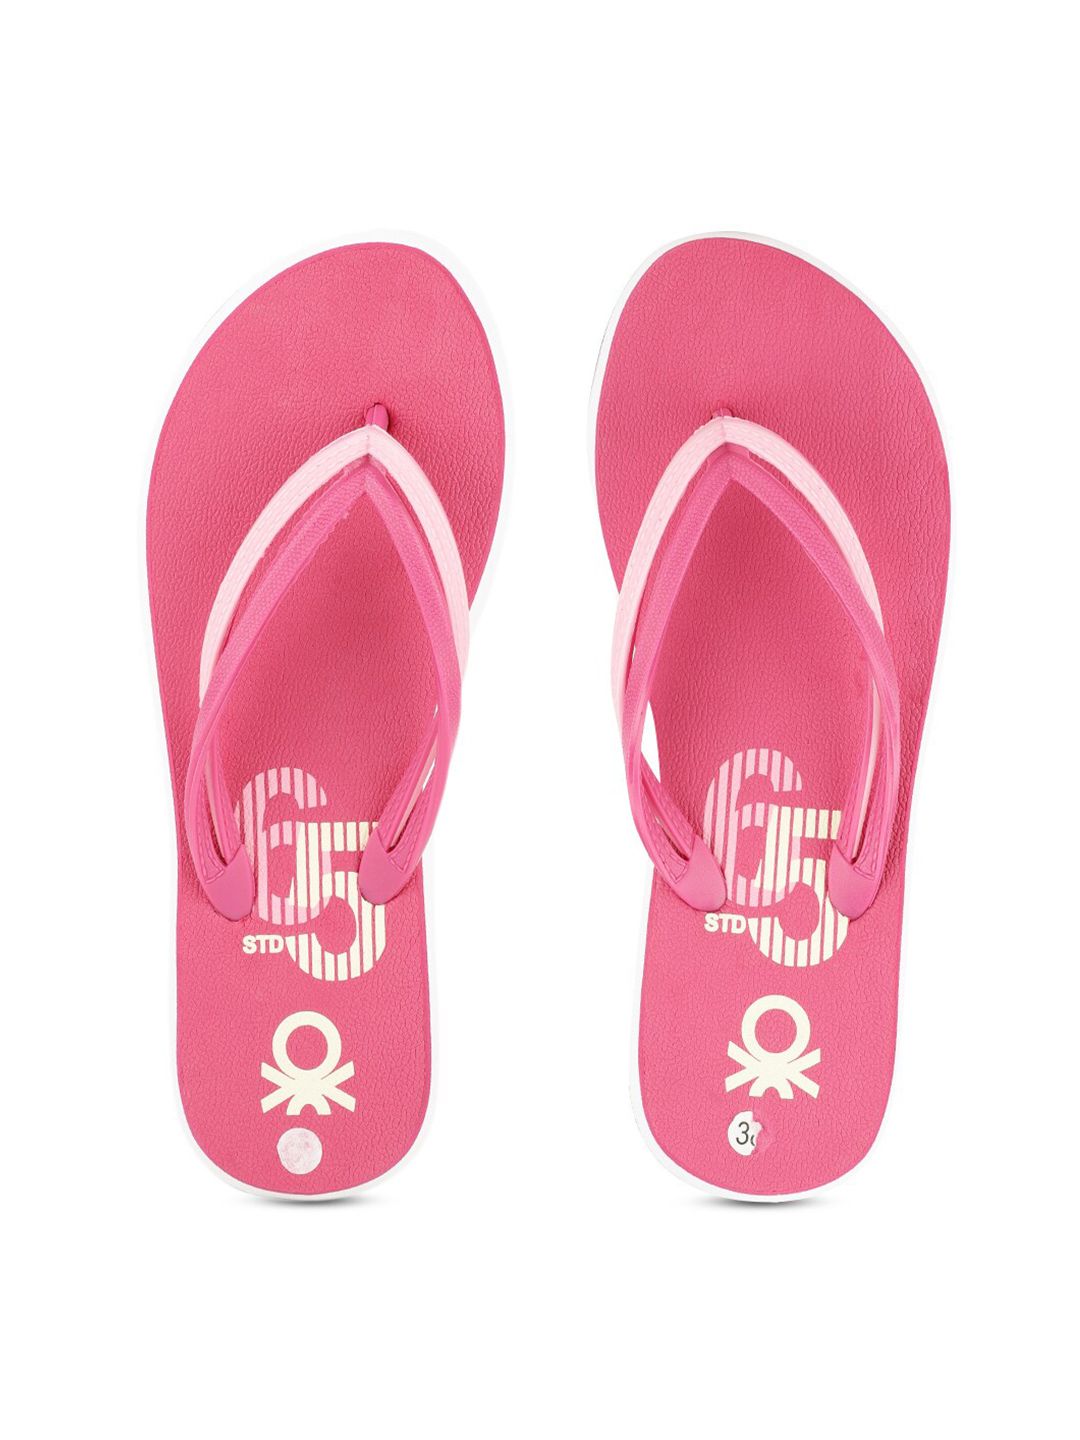 United Colors of Benetton Women Fuchsia Printed Rubber Thong Flip-Flops Price in India